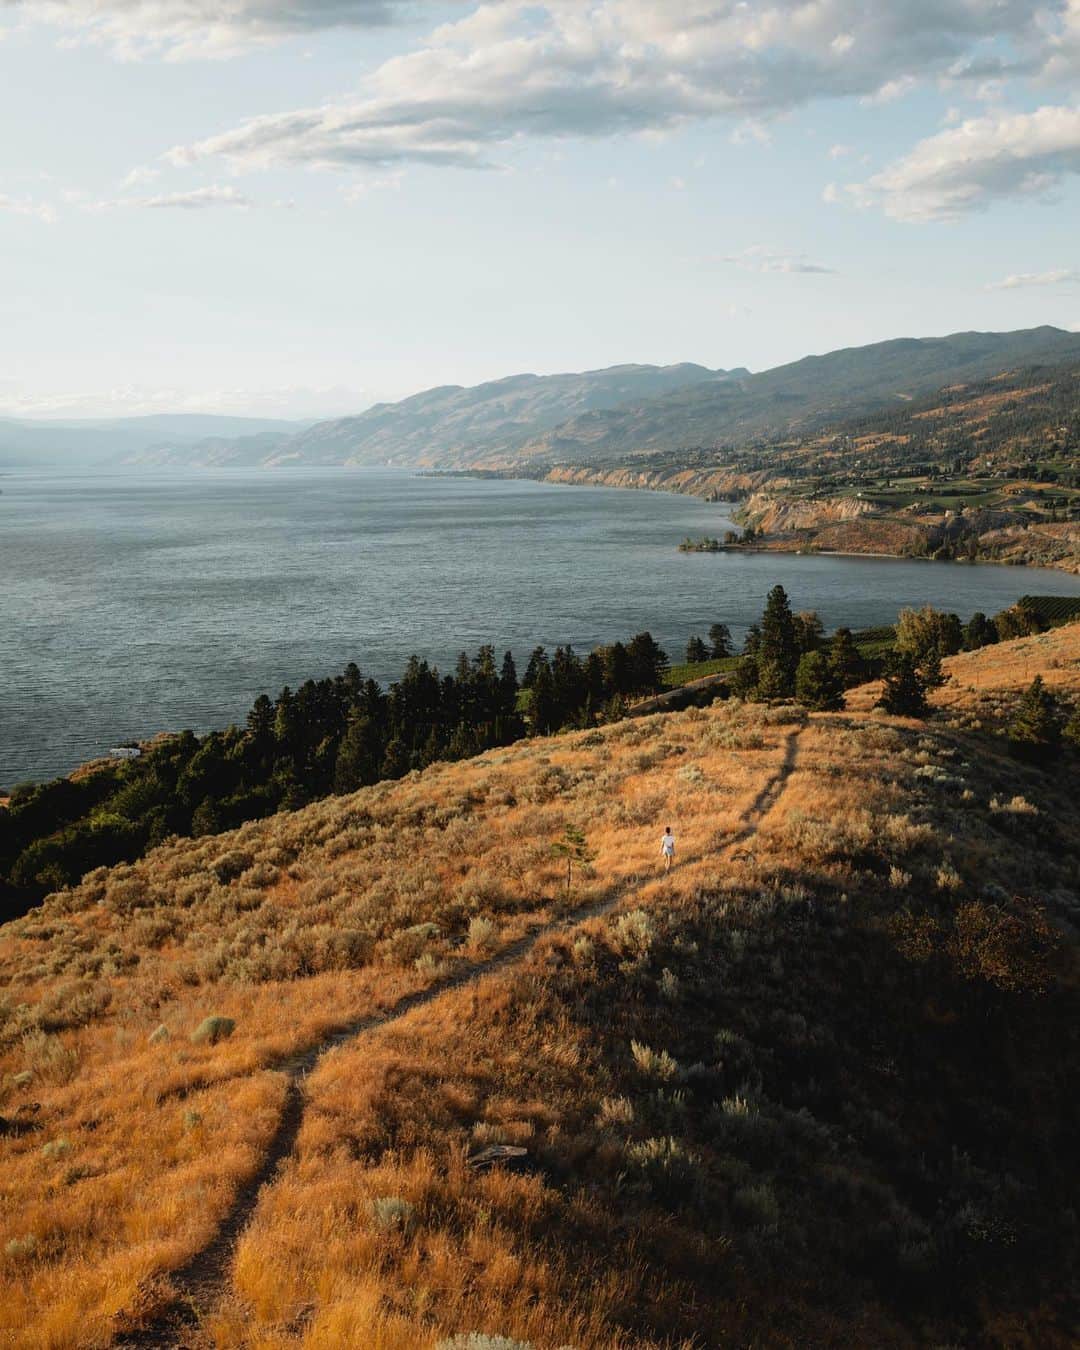 Explore Canadaのインスタグラム：「From vineyard strolls in the Okanagan to coastal adventures on Vancouver Island, discover the beauty of fall in BC: 🍂 Taking in the autumnal vistas of Penticton 🍷 Visiting wine country near West Kelowna 🌲 Cozying up in a cabin in Tofino 💨 Storm watching in Pacific Rim National Park #exploreBC #exploreBCnow #ExploreCanada  Credit: @mikeseehagel, Penticton @vancouverfoodie, West Kelowna @duffincove, Tofino @russell.depeel, Pacific Rim  While this summer brought immeasurable challenges to many communities in British Columbia, the province is open for travel and ready to welcome guests. Visit, meet the locals, and plan to stay — there’s no better way to help BC communities than by exploring BC.  Image Descriptions: Photo 1) An aerial view of a person walking through the golden hills of a valley. A vast body of ocean water sits in the distance. White clouds drift past the pale blue sky. Photo 2) A woman with a large red hat is sitting on a green hill overlooking a large field. A gathering of houses crowds the shoreline. In the background, brown forested mountains are seen across from the water. Photo 3) A sleek, black cottage sits at the edge of a rocky shoreline. Tall, green trees surround the house. In the distance, a hazy outline of the forest rests atop calm lake waters. Photo 4) Deep turquoise waves crash against a dark, rocky shoreline. A forested horizon rests below gloomy skies.」